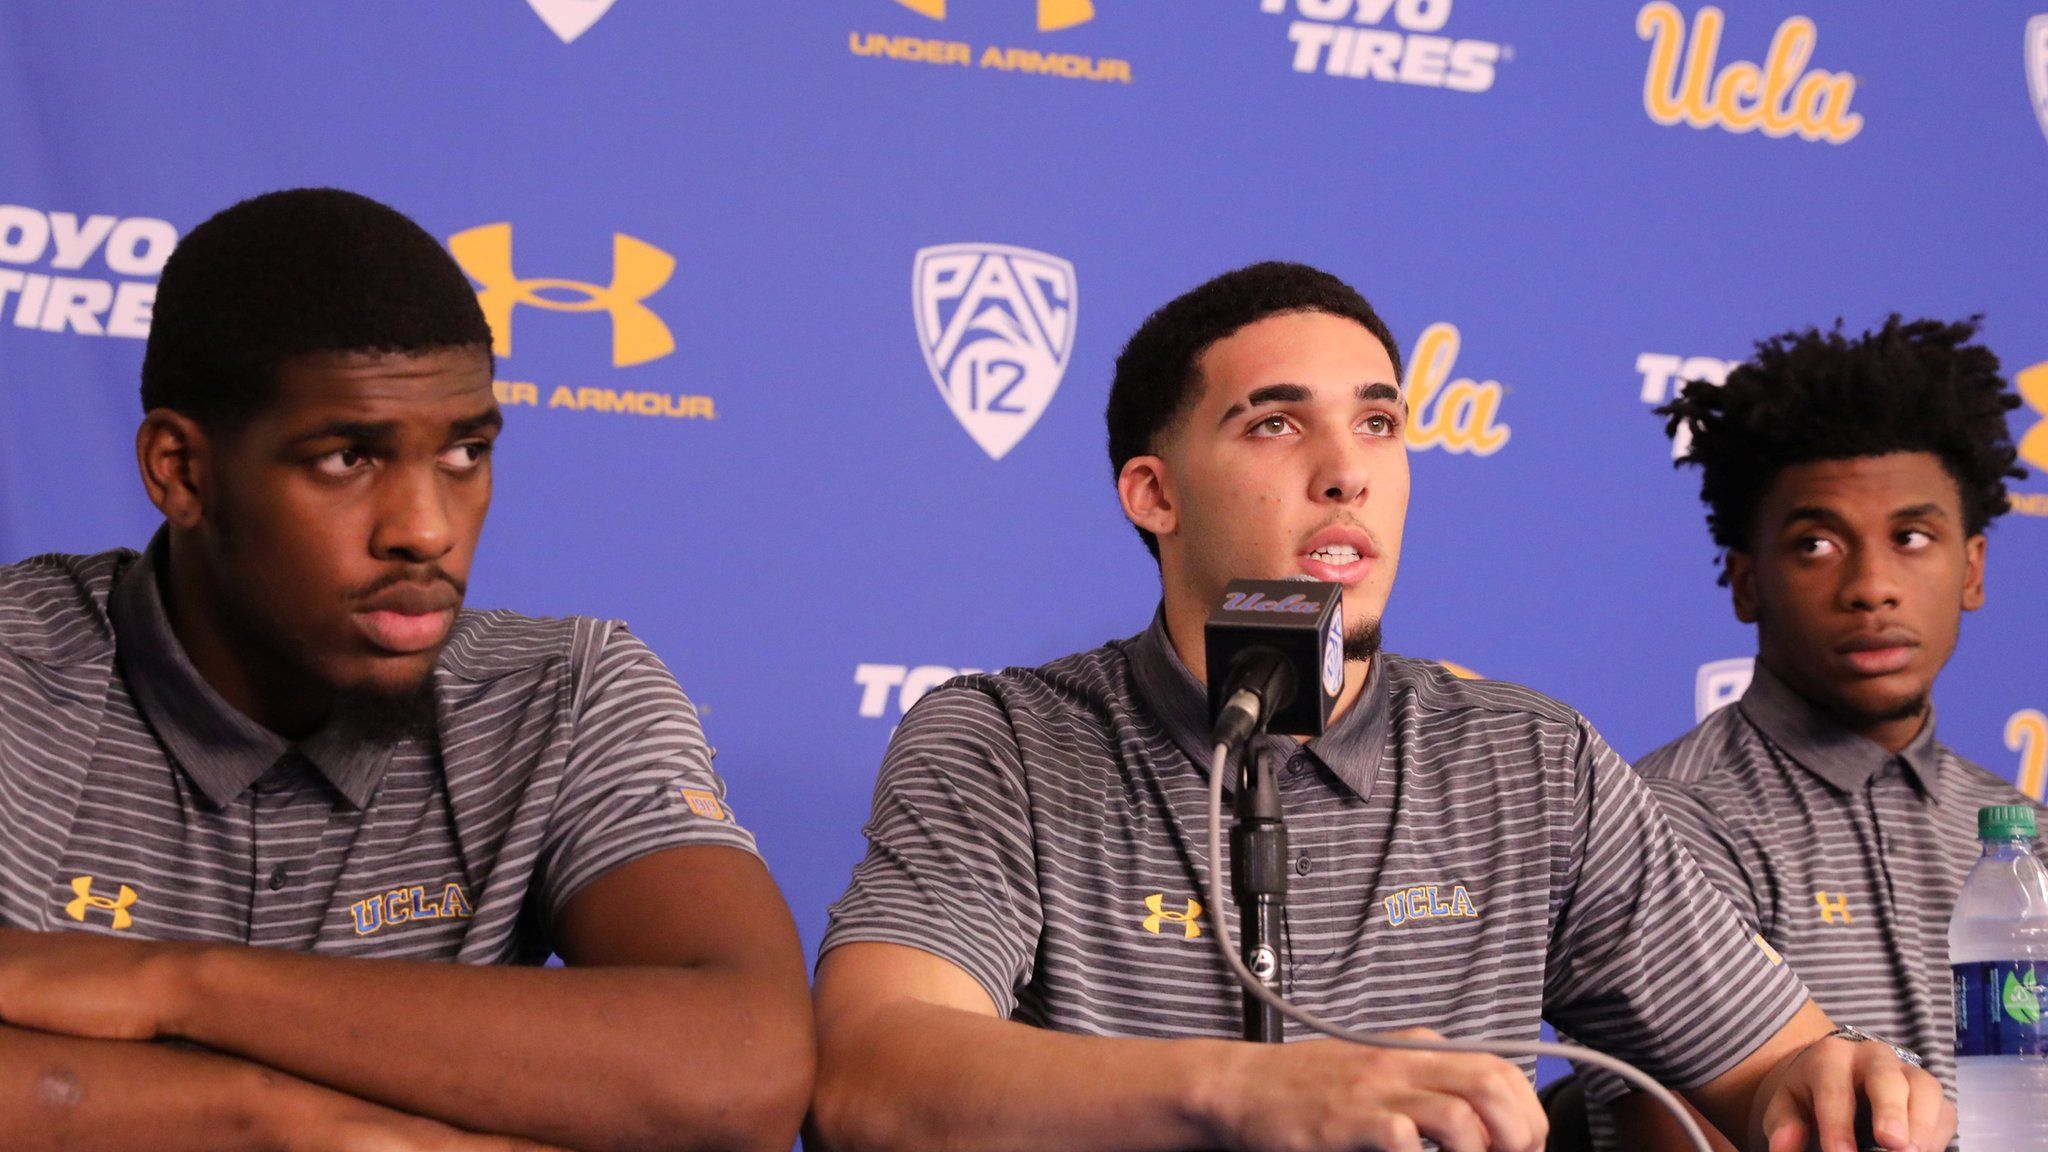 (L-R) UCLA basketball players Cody Riley, LiAngelo Ball and Jalen Hill